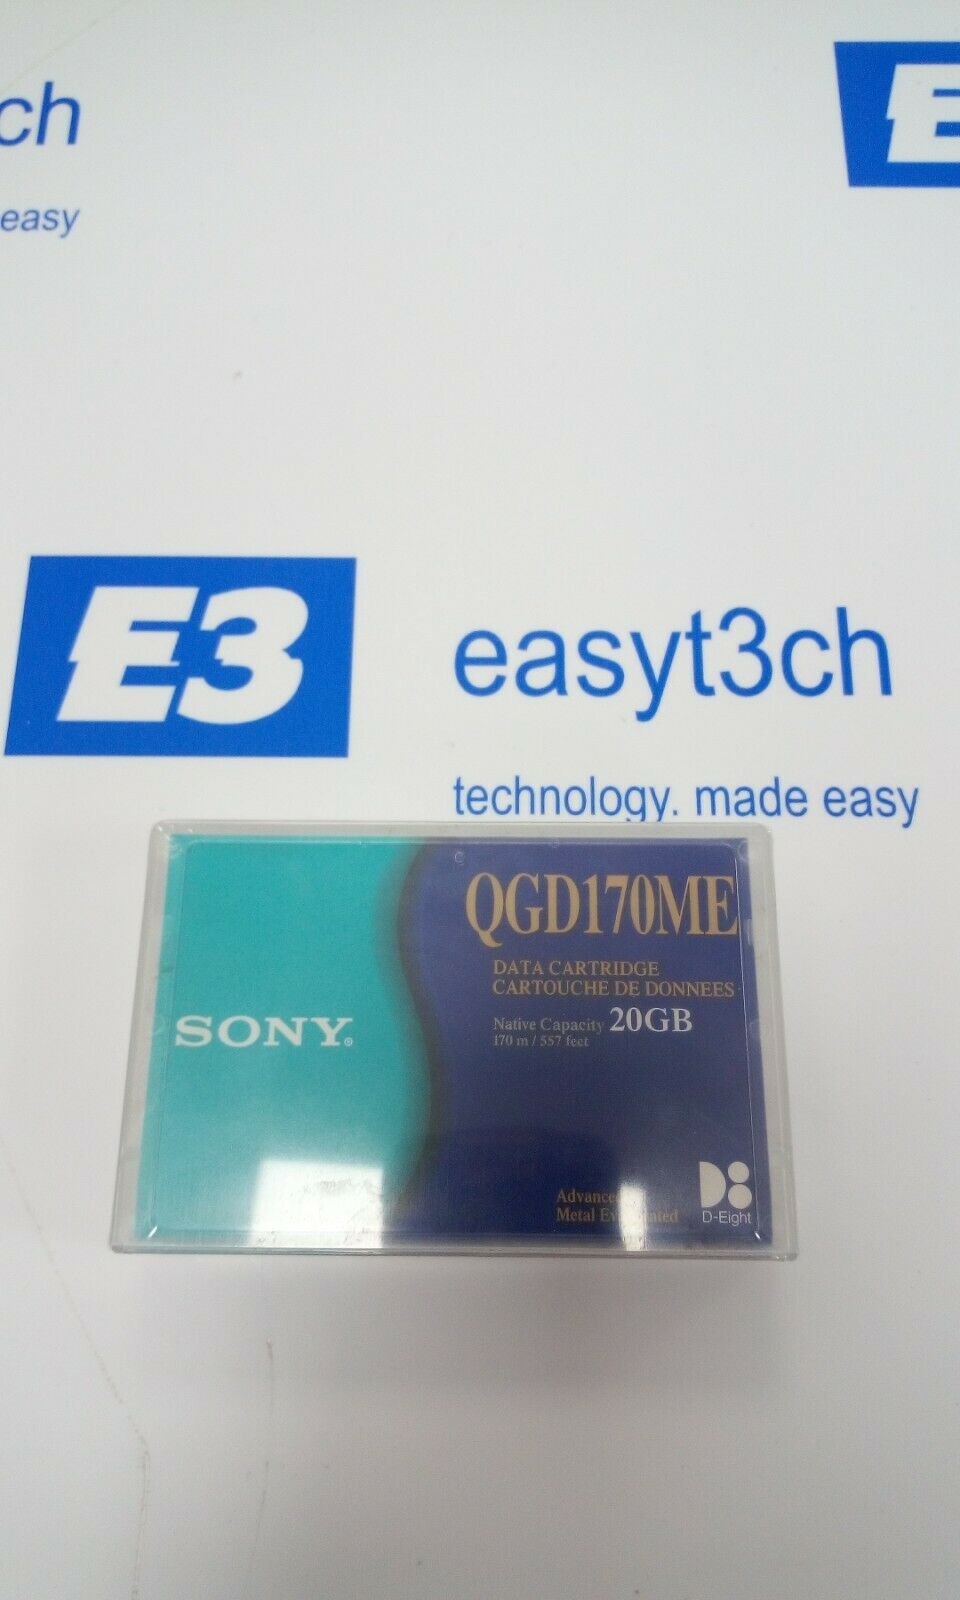 NEW! SONY QGD170ME AME 20GB 170m Data Tape Cartridge Mammoth 8mm - SEALED